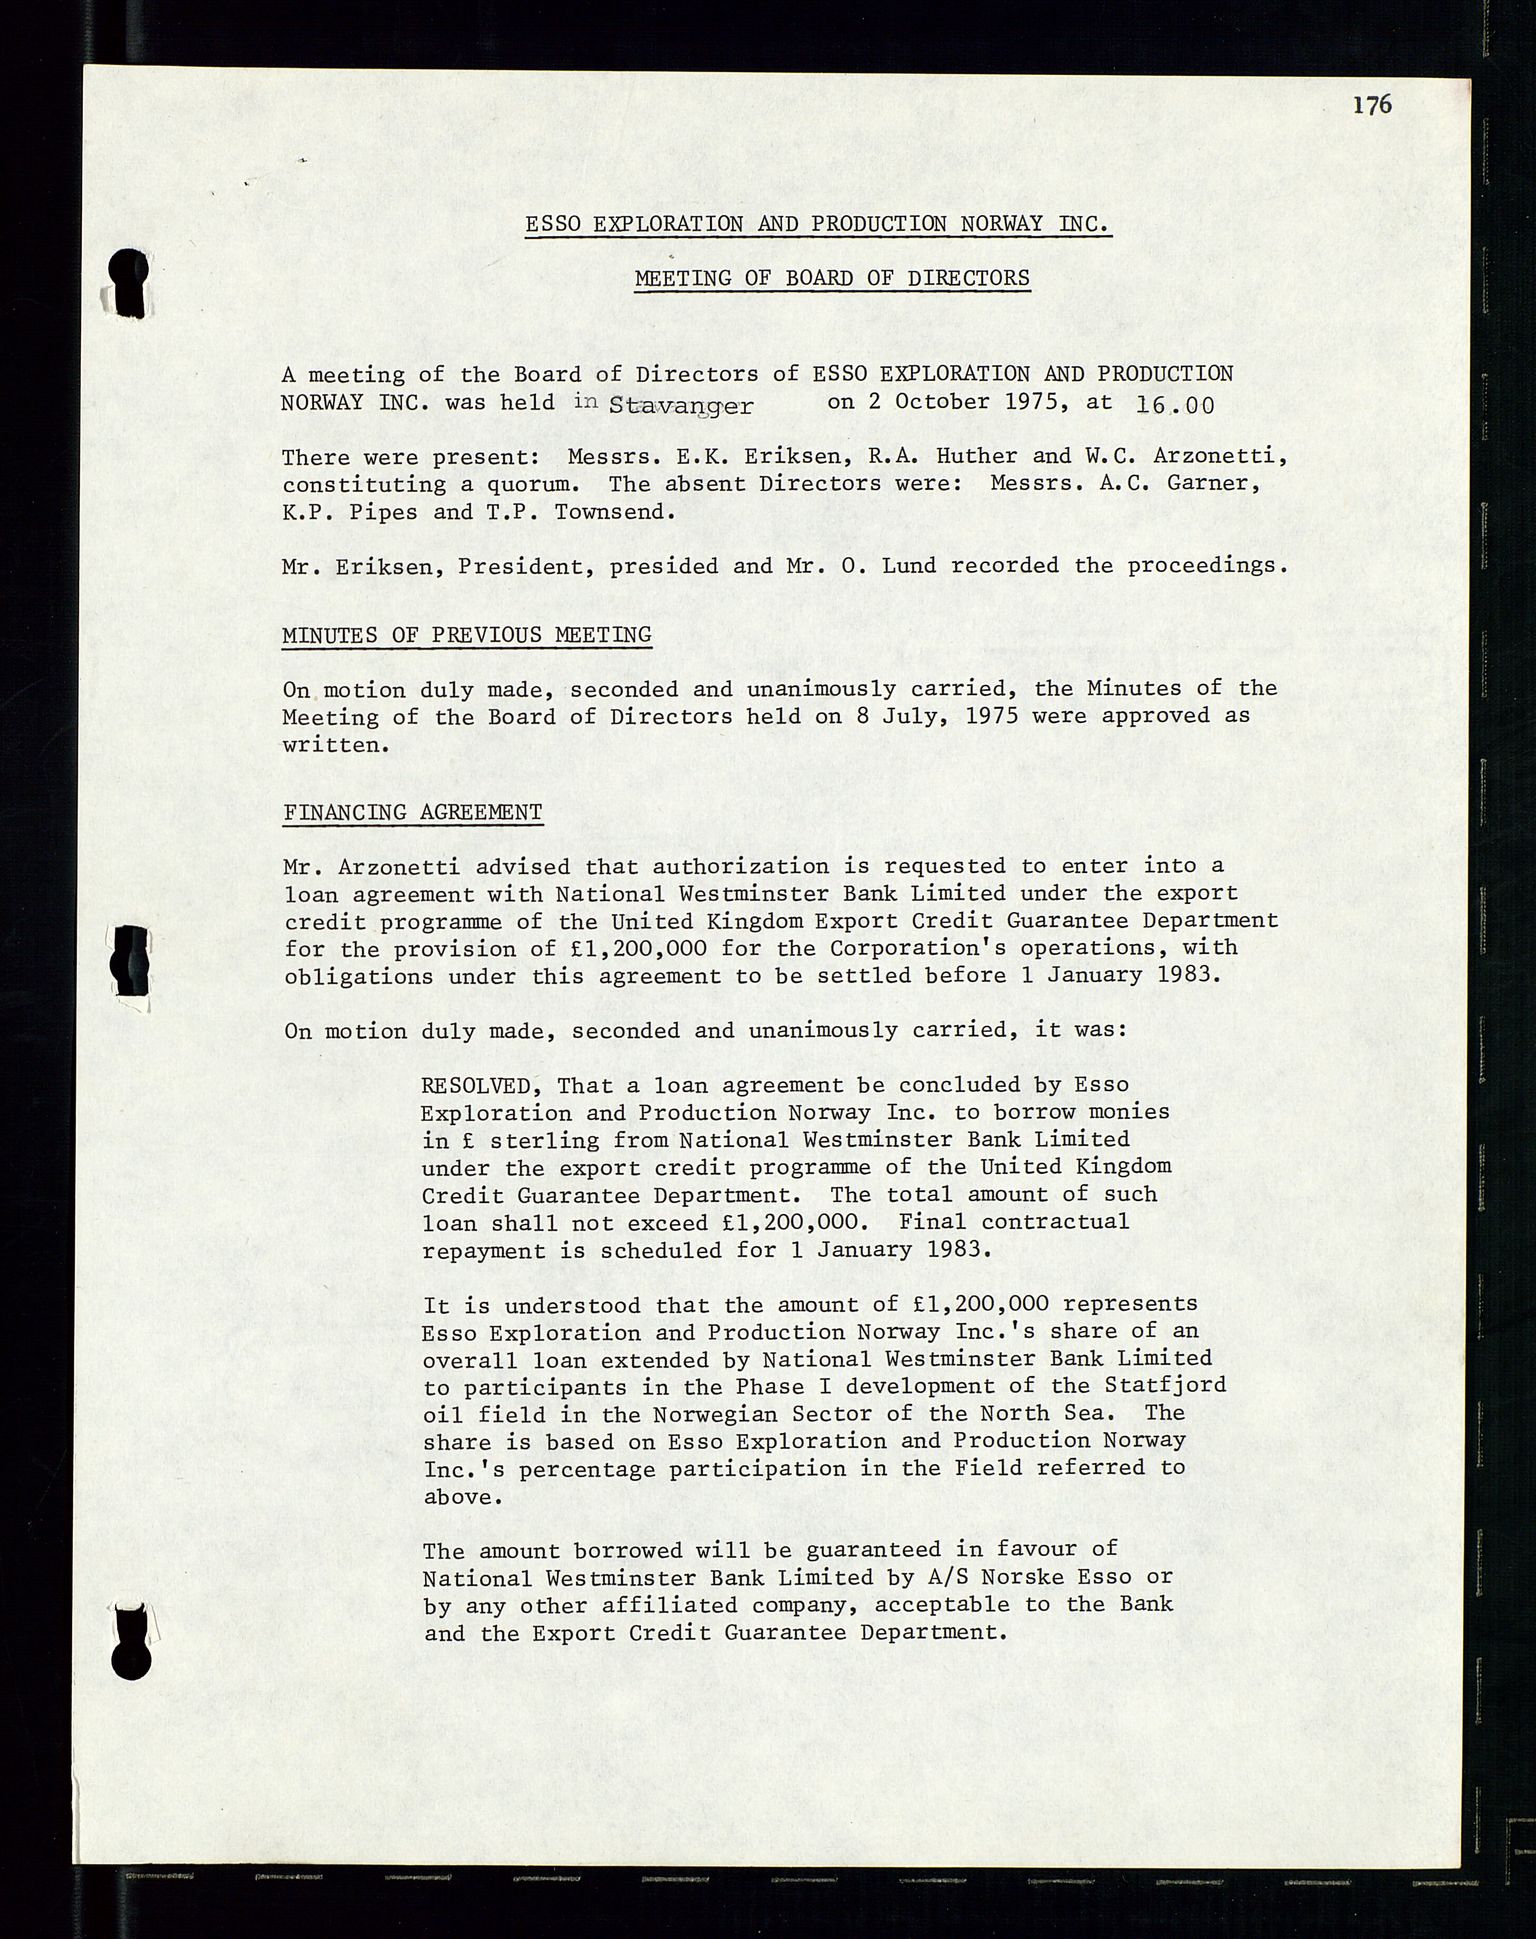 Pa 1512 - Esso Exploration and Production Norway Inc., SAST/A-101917/A/Aa/L0001/0002: Styredokumenter / Corporate records, Board meeting minutes, Agreements, Stocholder meetings, 1975-1979, s. 7